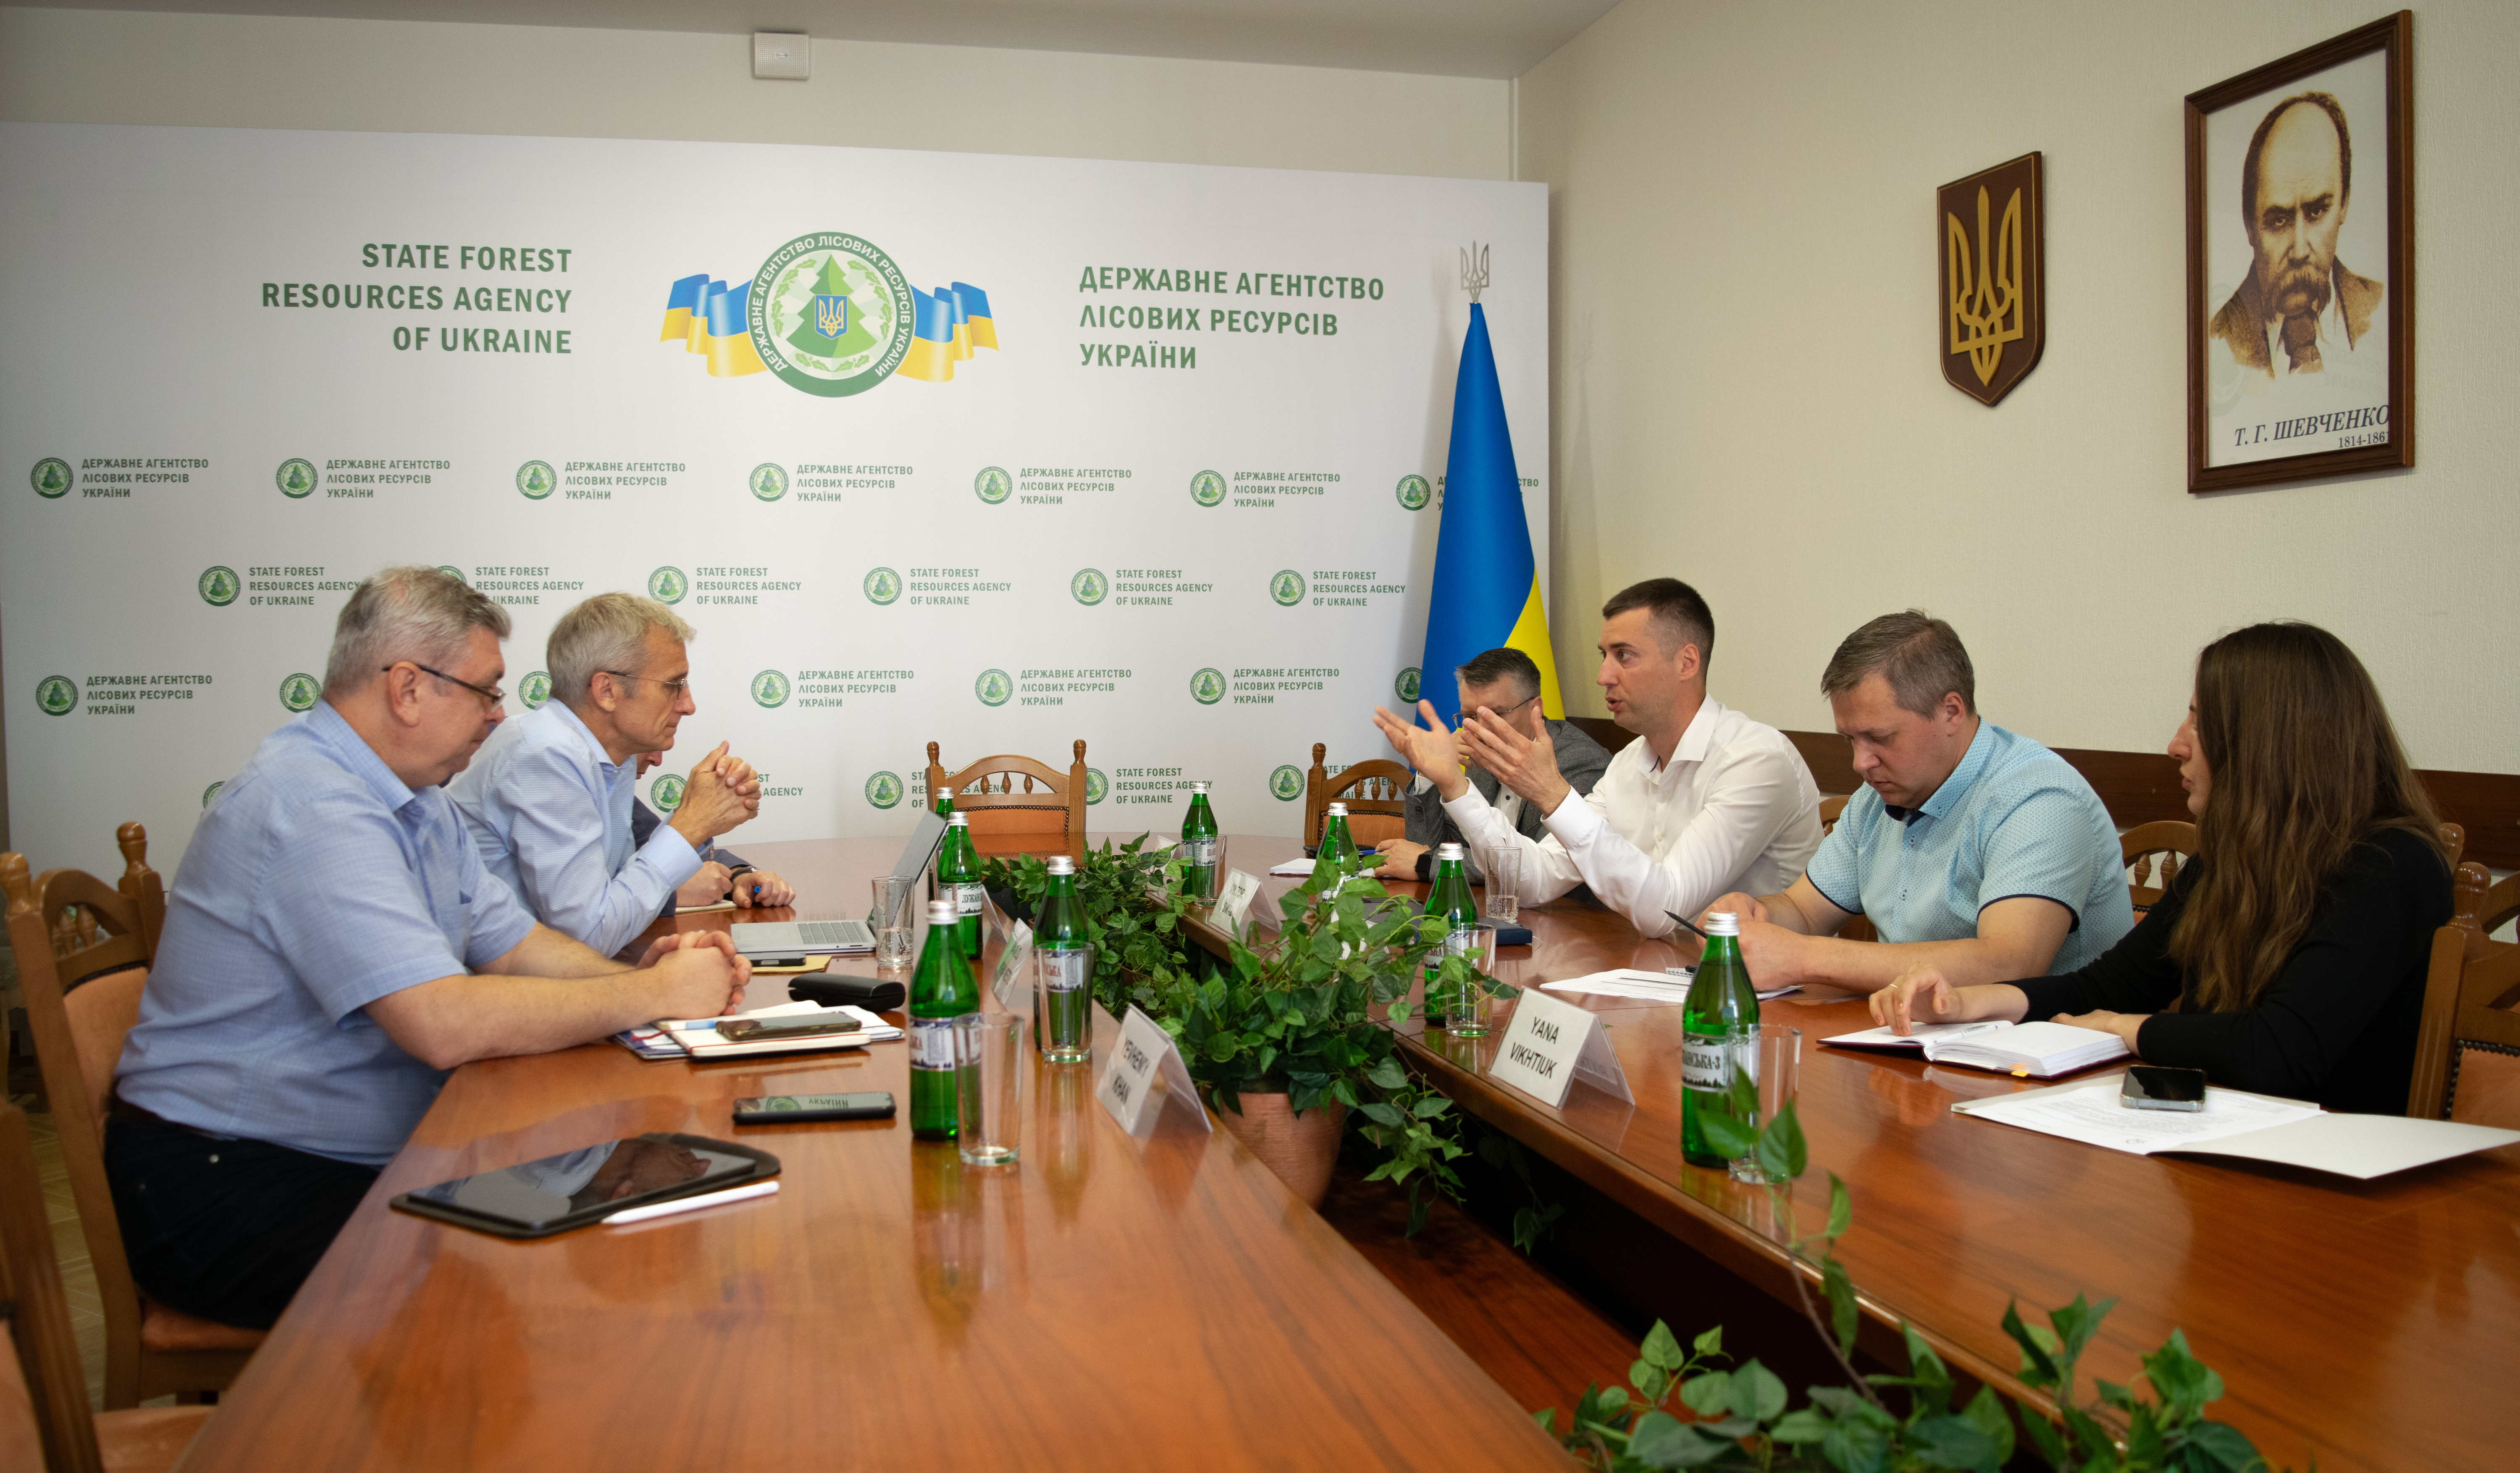 State Forest Resources Agency of Ukraine